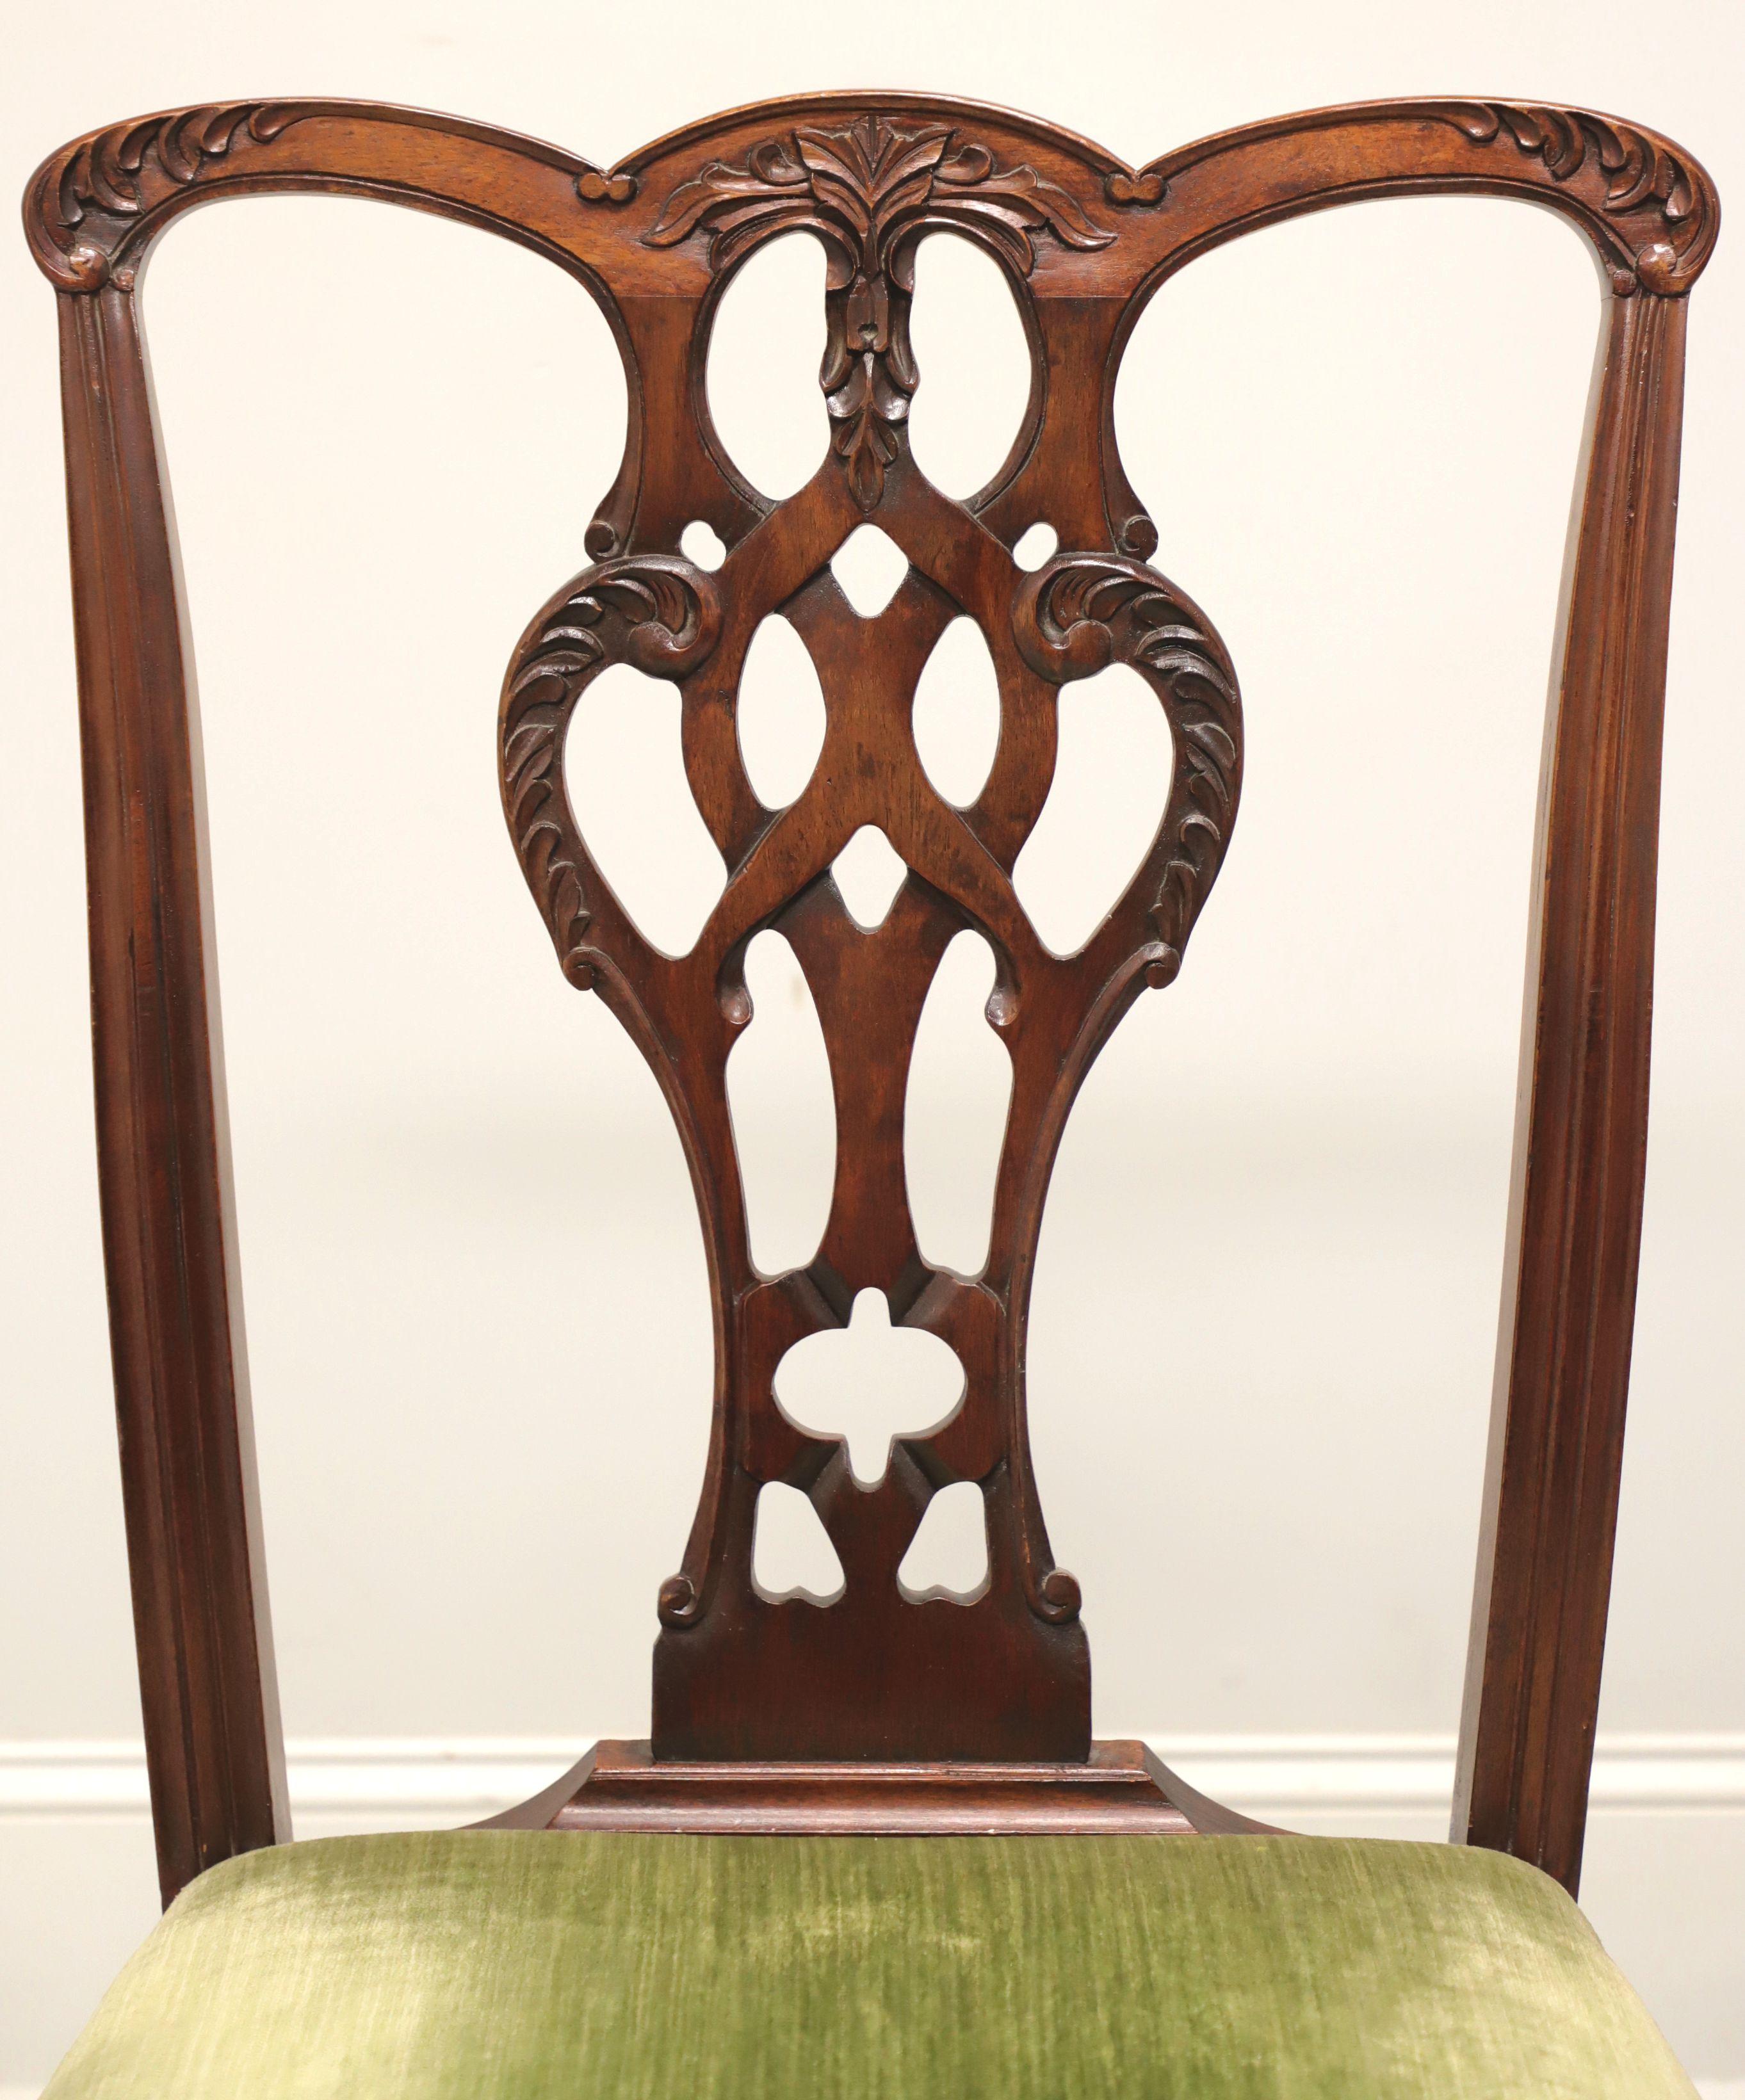 CRAFTIQUE Mahogany Chippendale Style Straight Leg Dining Side Chairs - Pair C For Sale 1